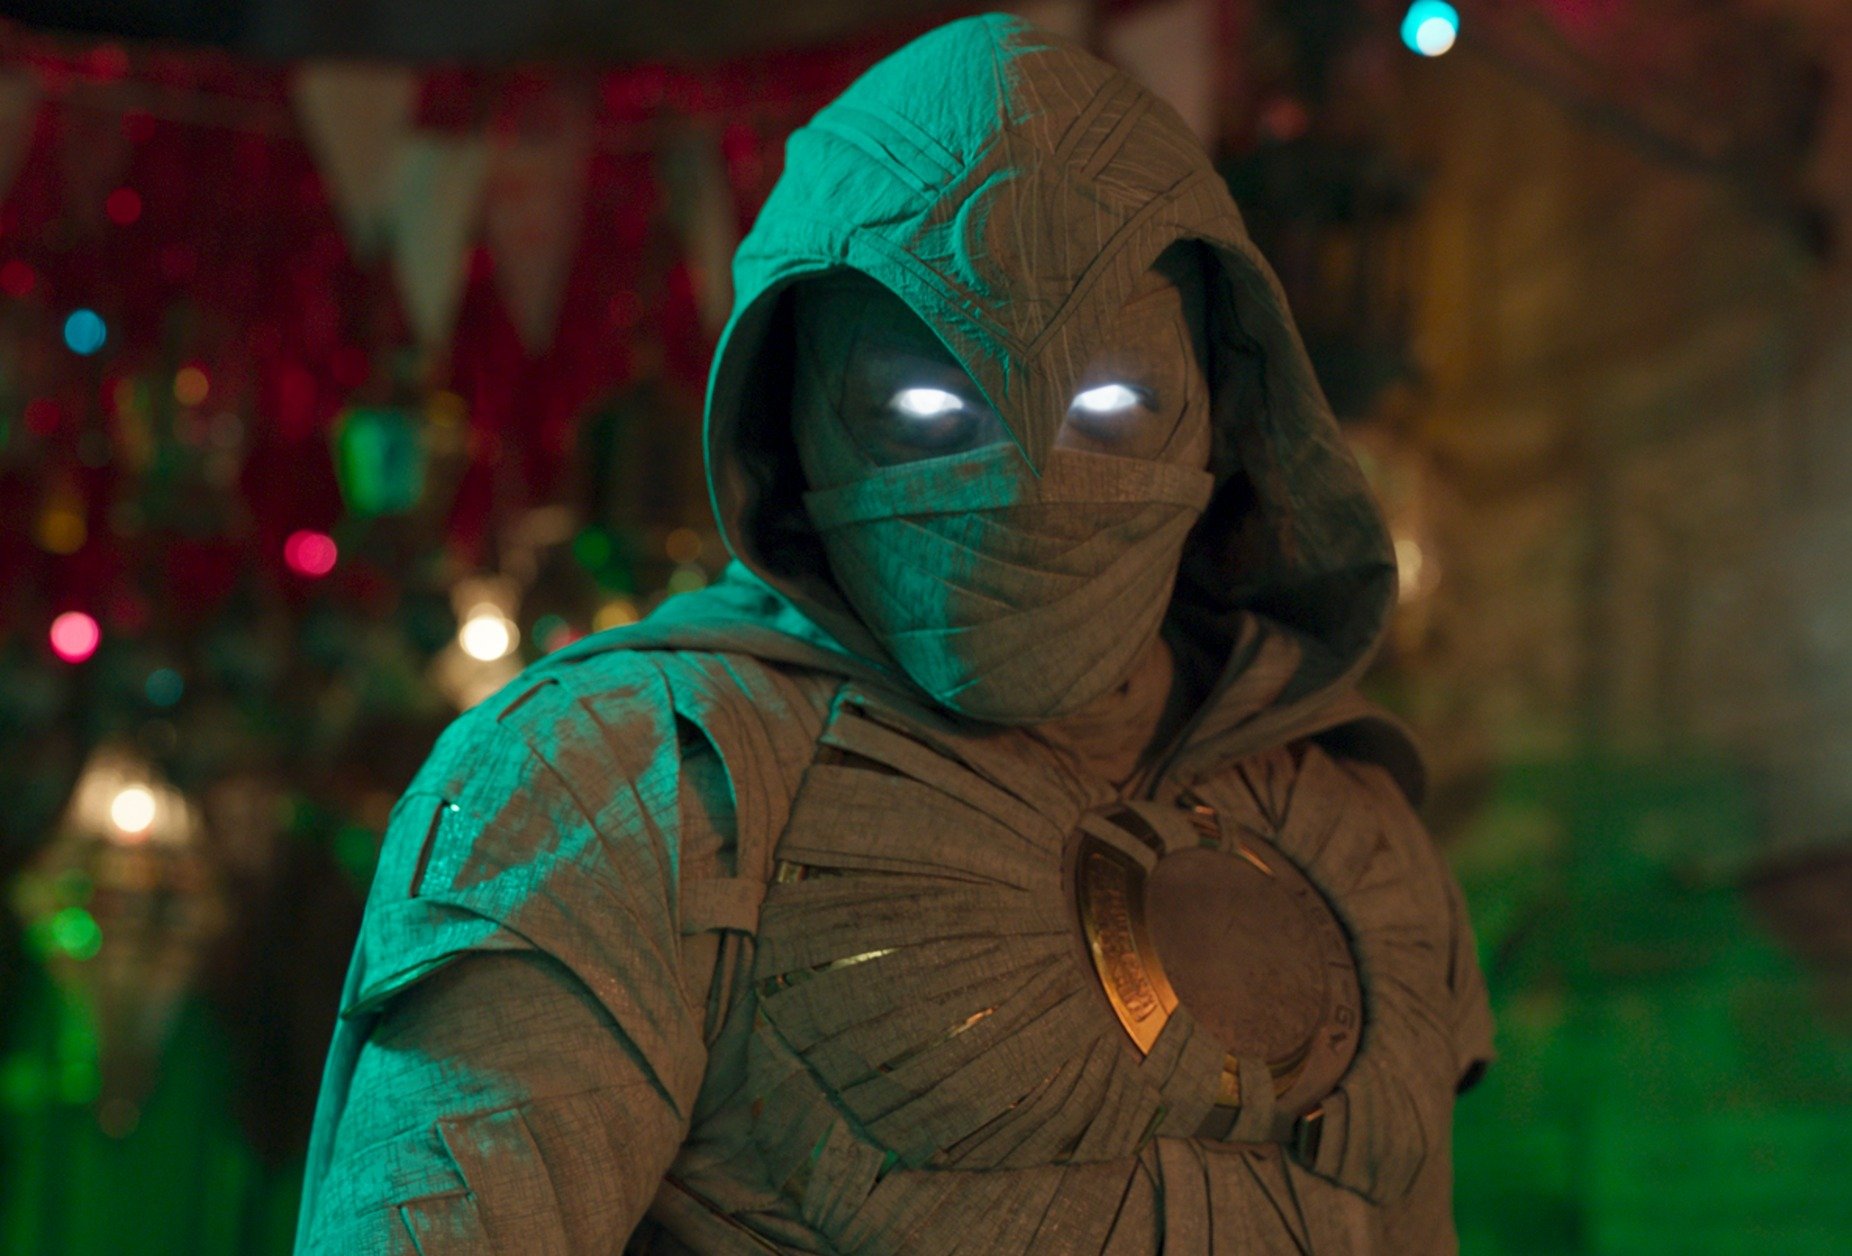 Oscar Isaac as Moon Knight in the 'Moon Knight' finale, which featured QR codes. He's wearing the grey costume, which consists of a mask and cloak. His eyes are white and glowing.